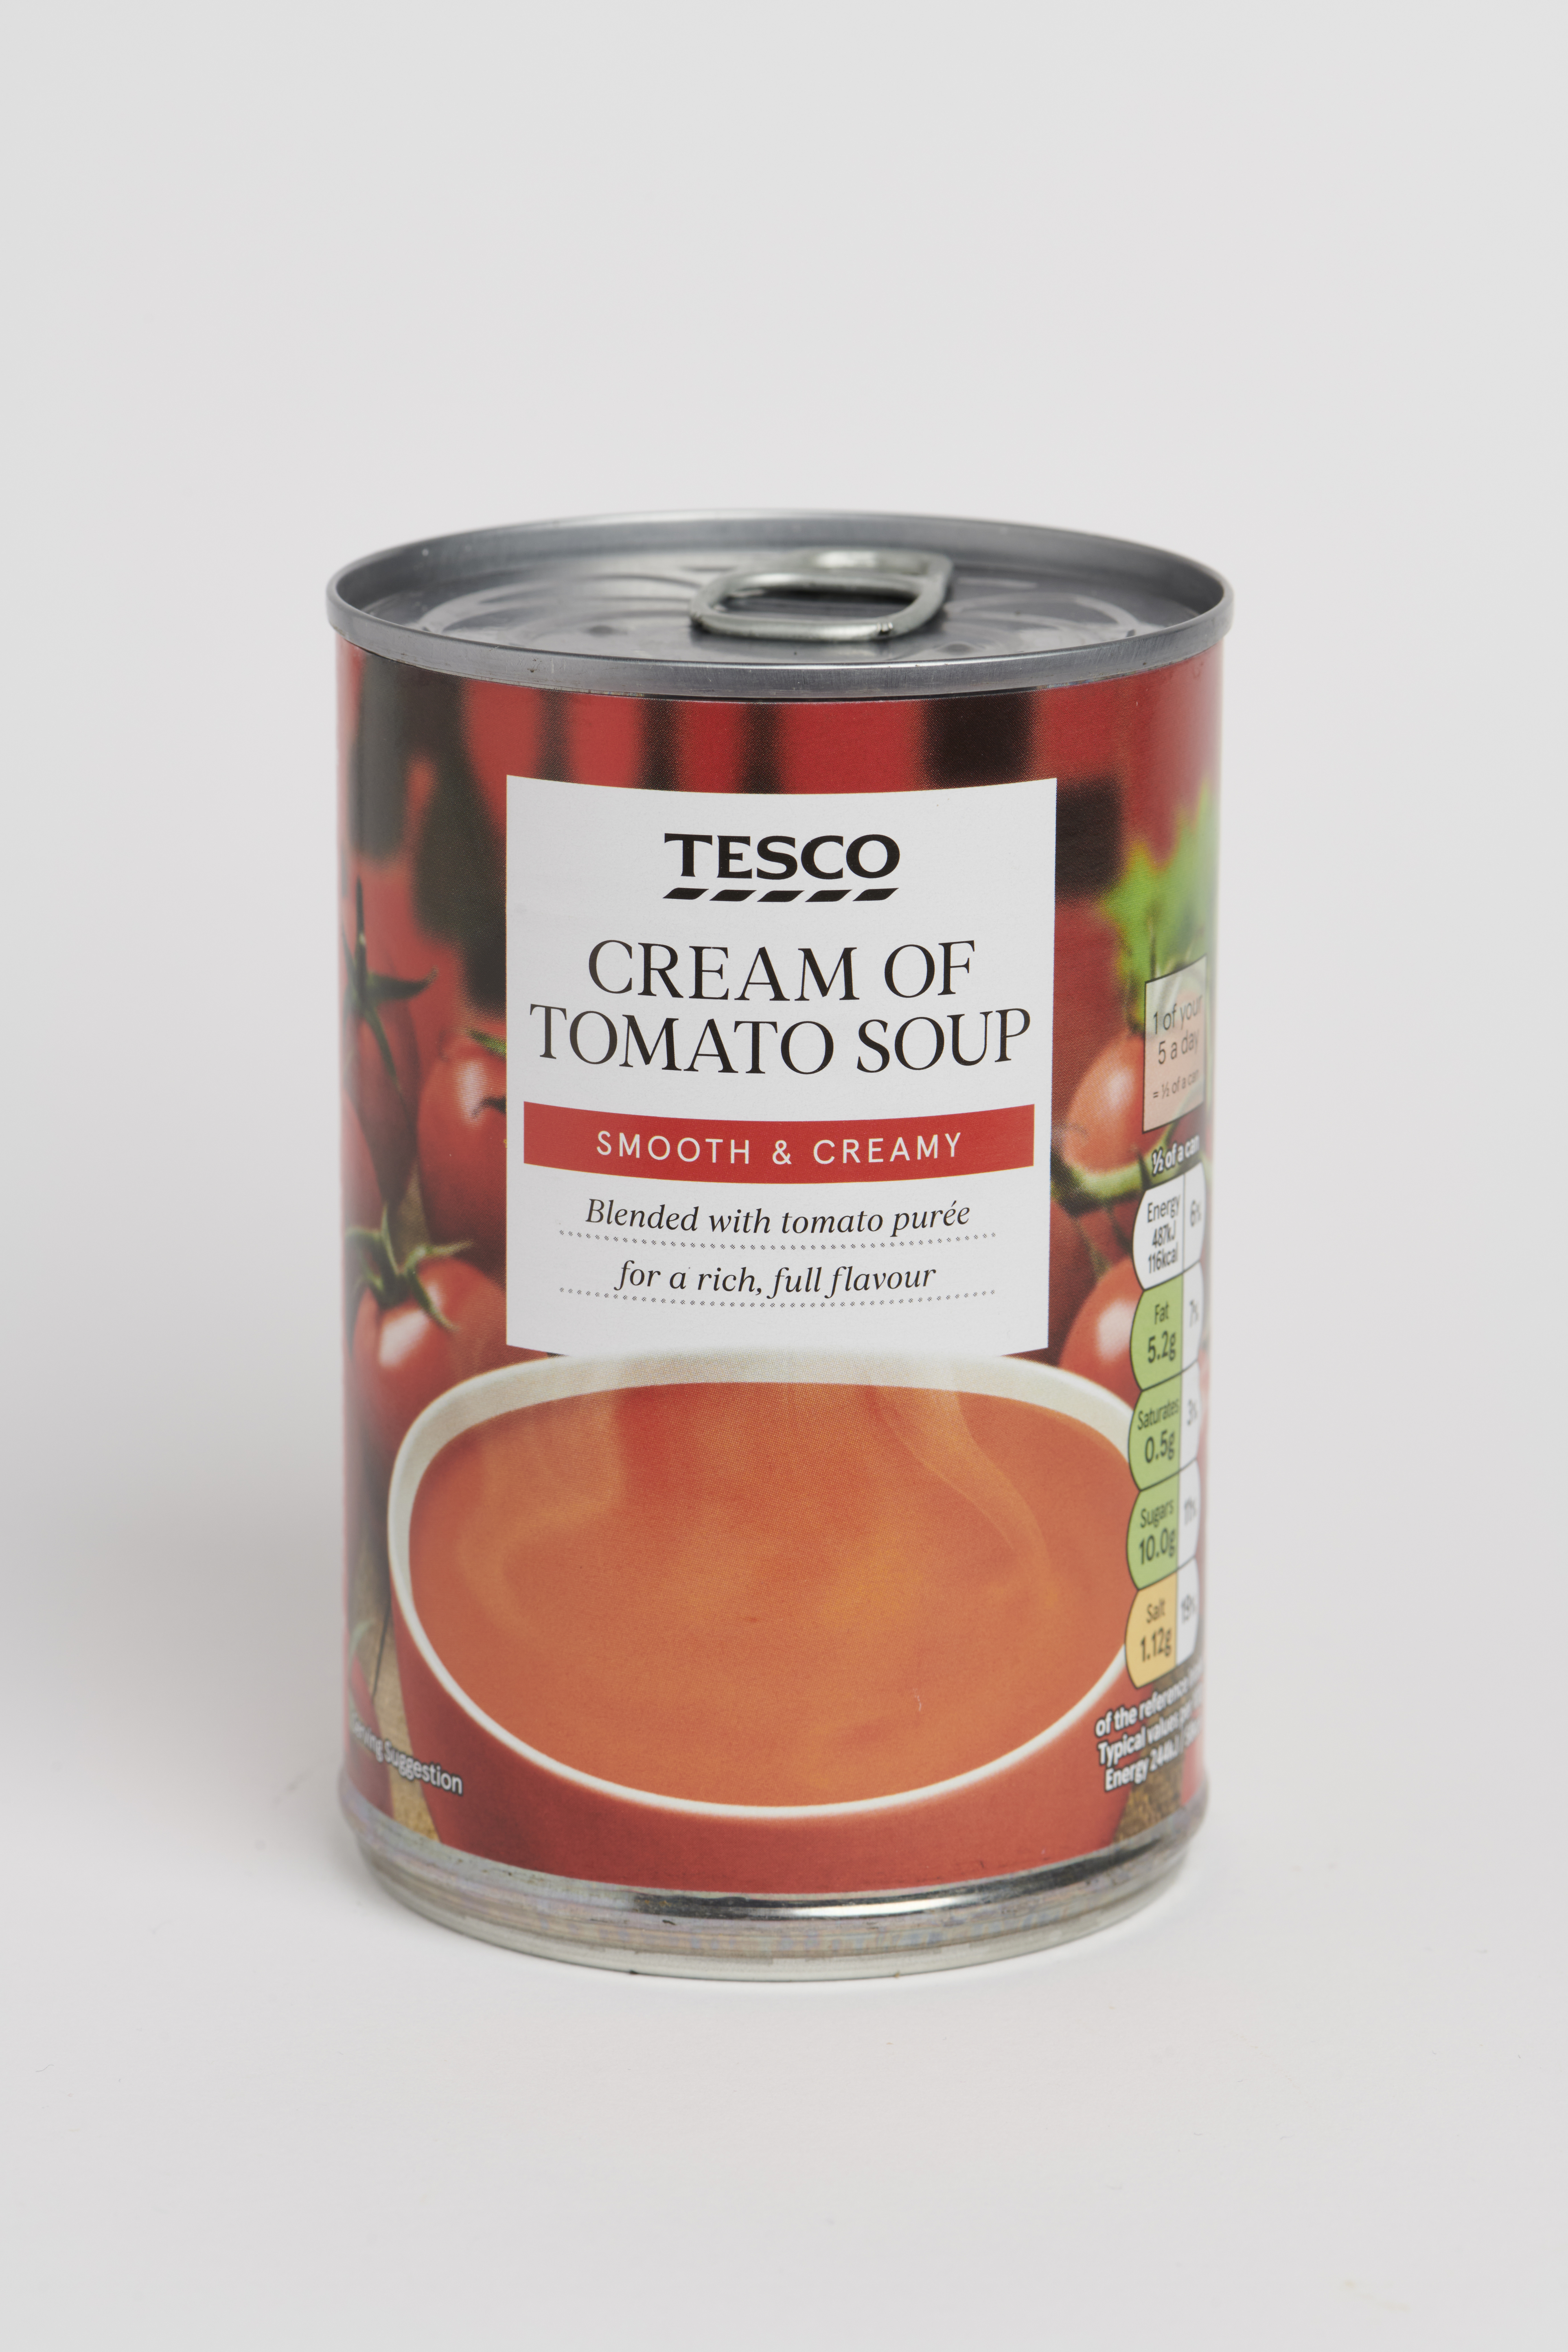 Tesco's tomato soup is just as good as Heinz